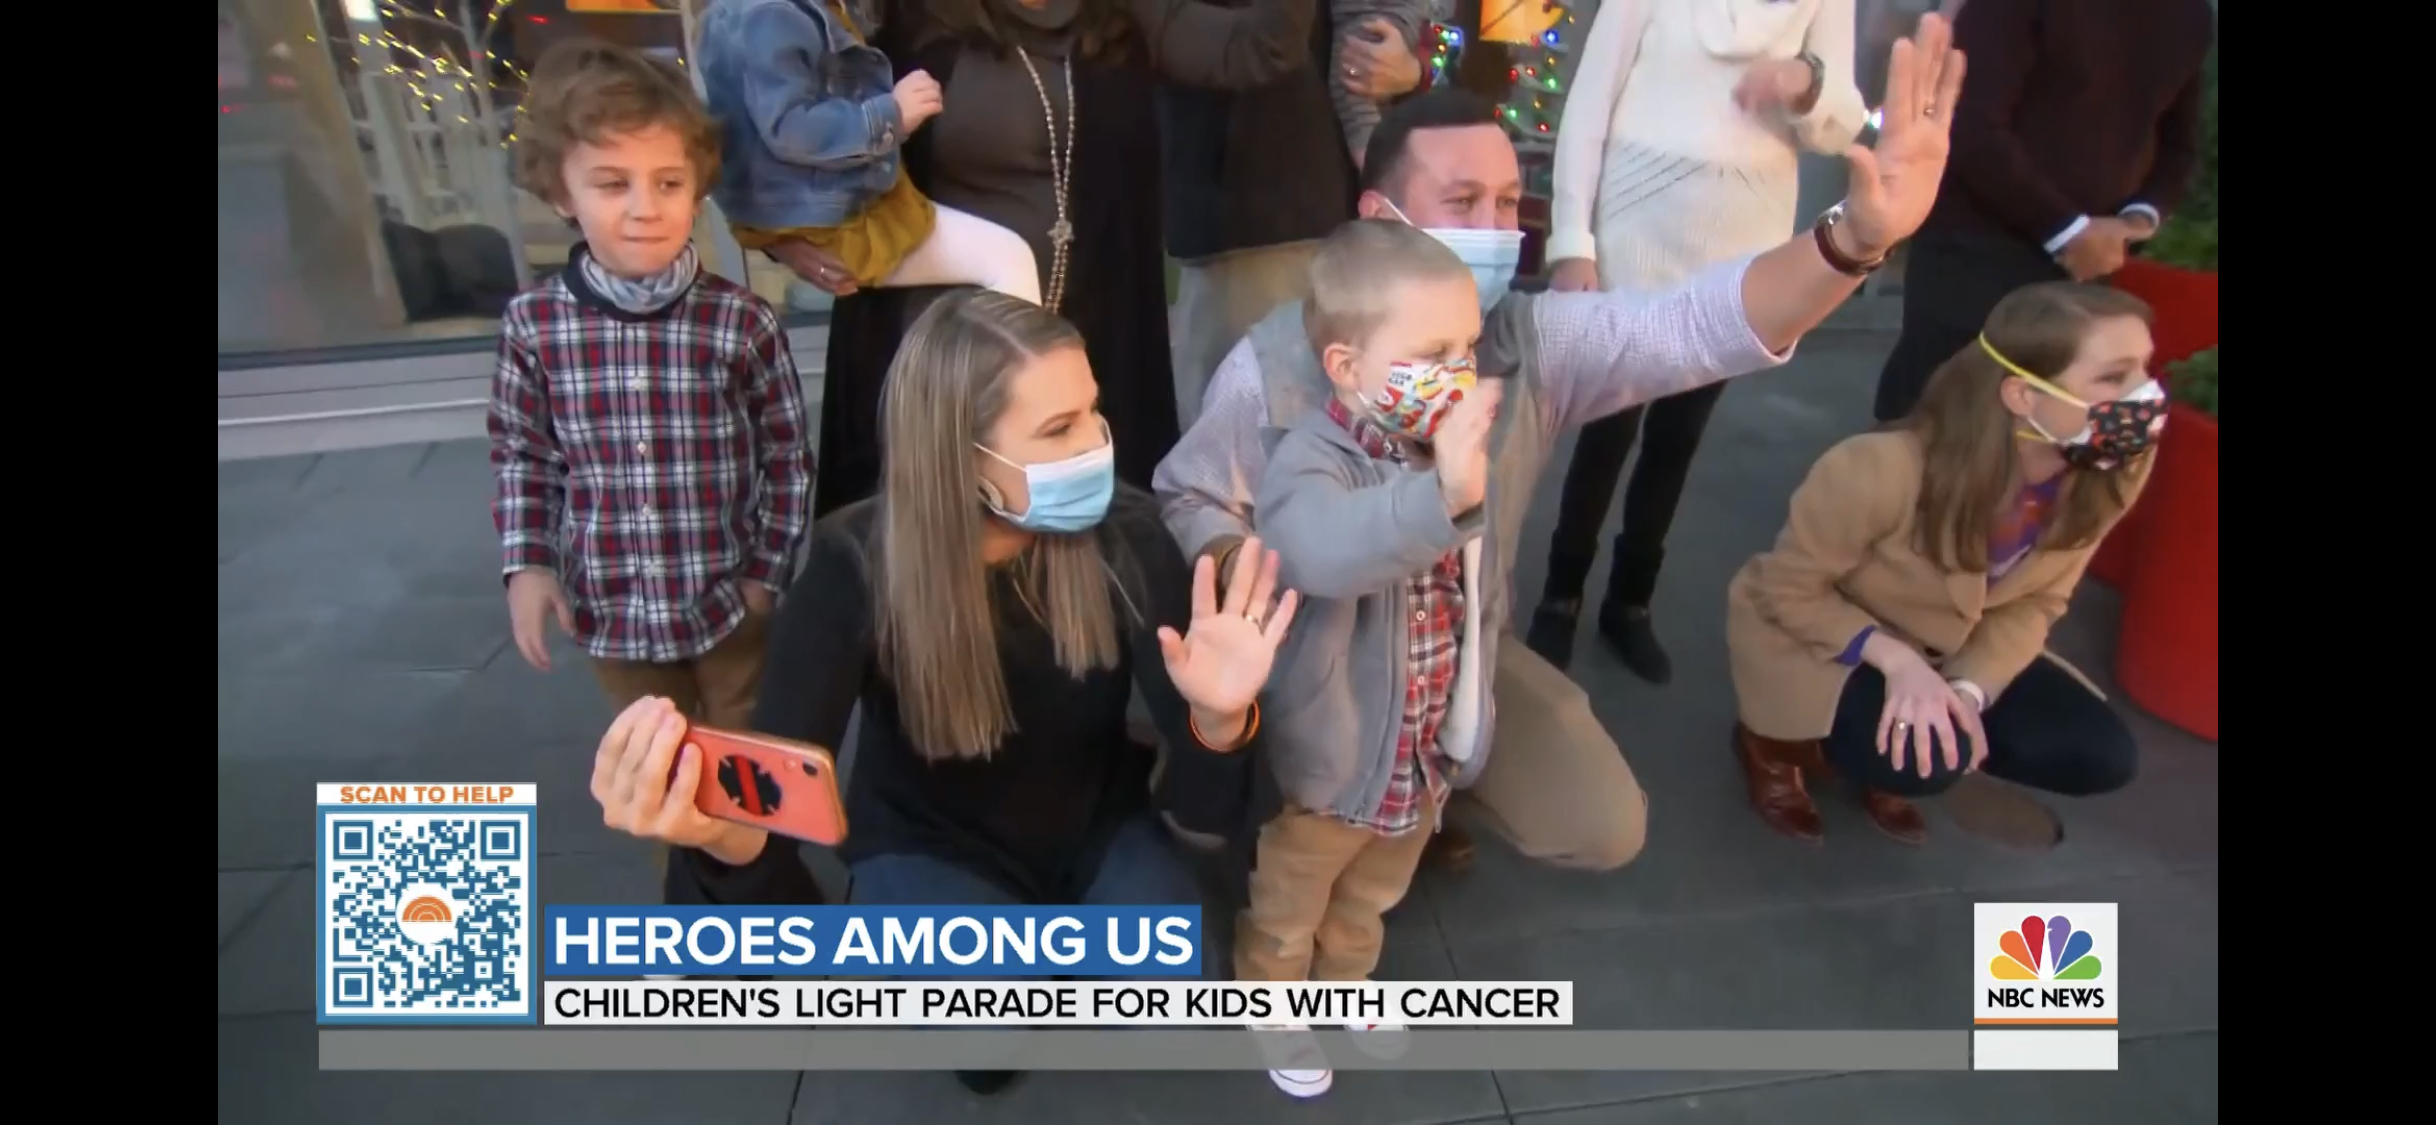 Trussville family receives Christmas surprise as 5-year-old son fights cancer